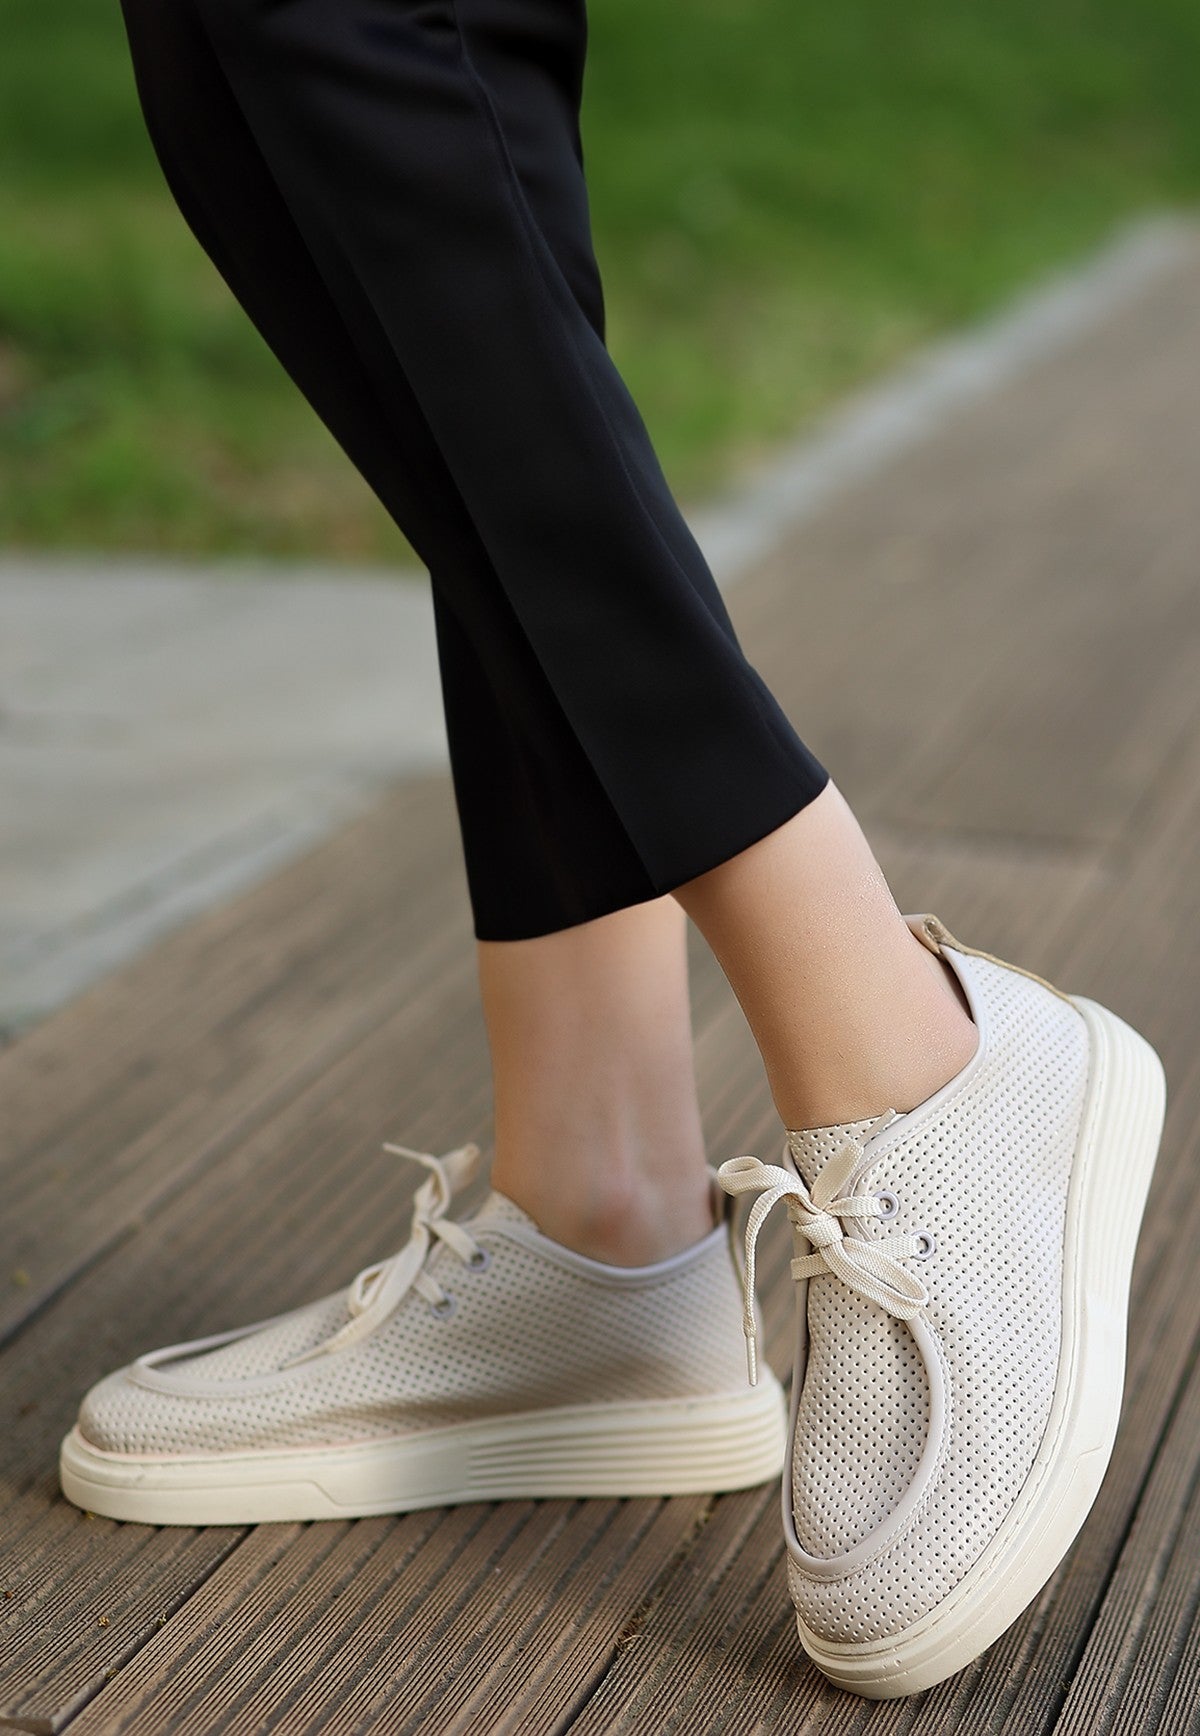 Women's Olse Beige Leather Laced Sports Shoes - STREETMODE ™